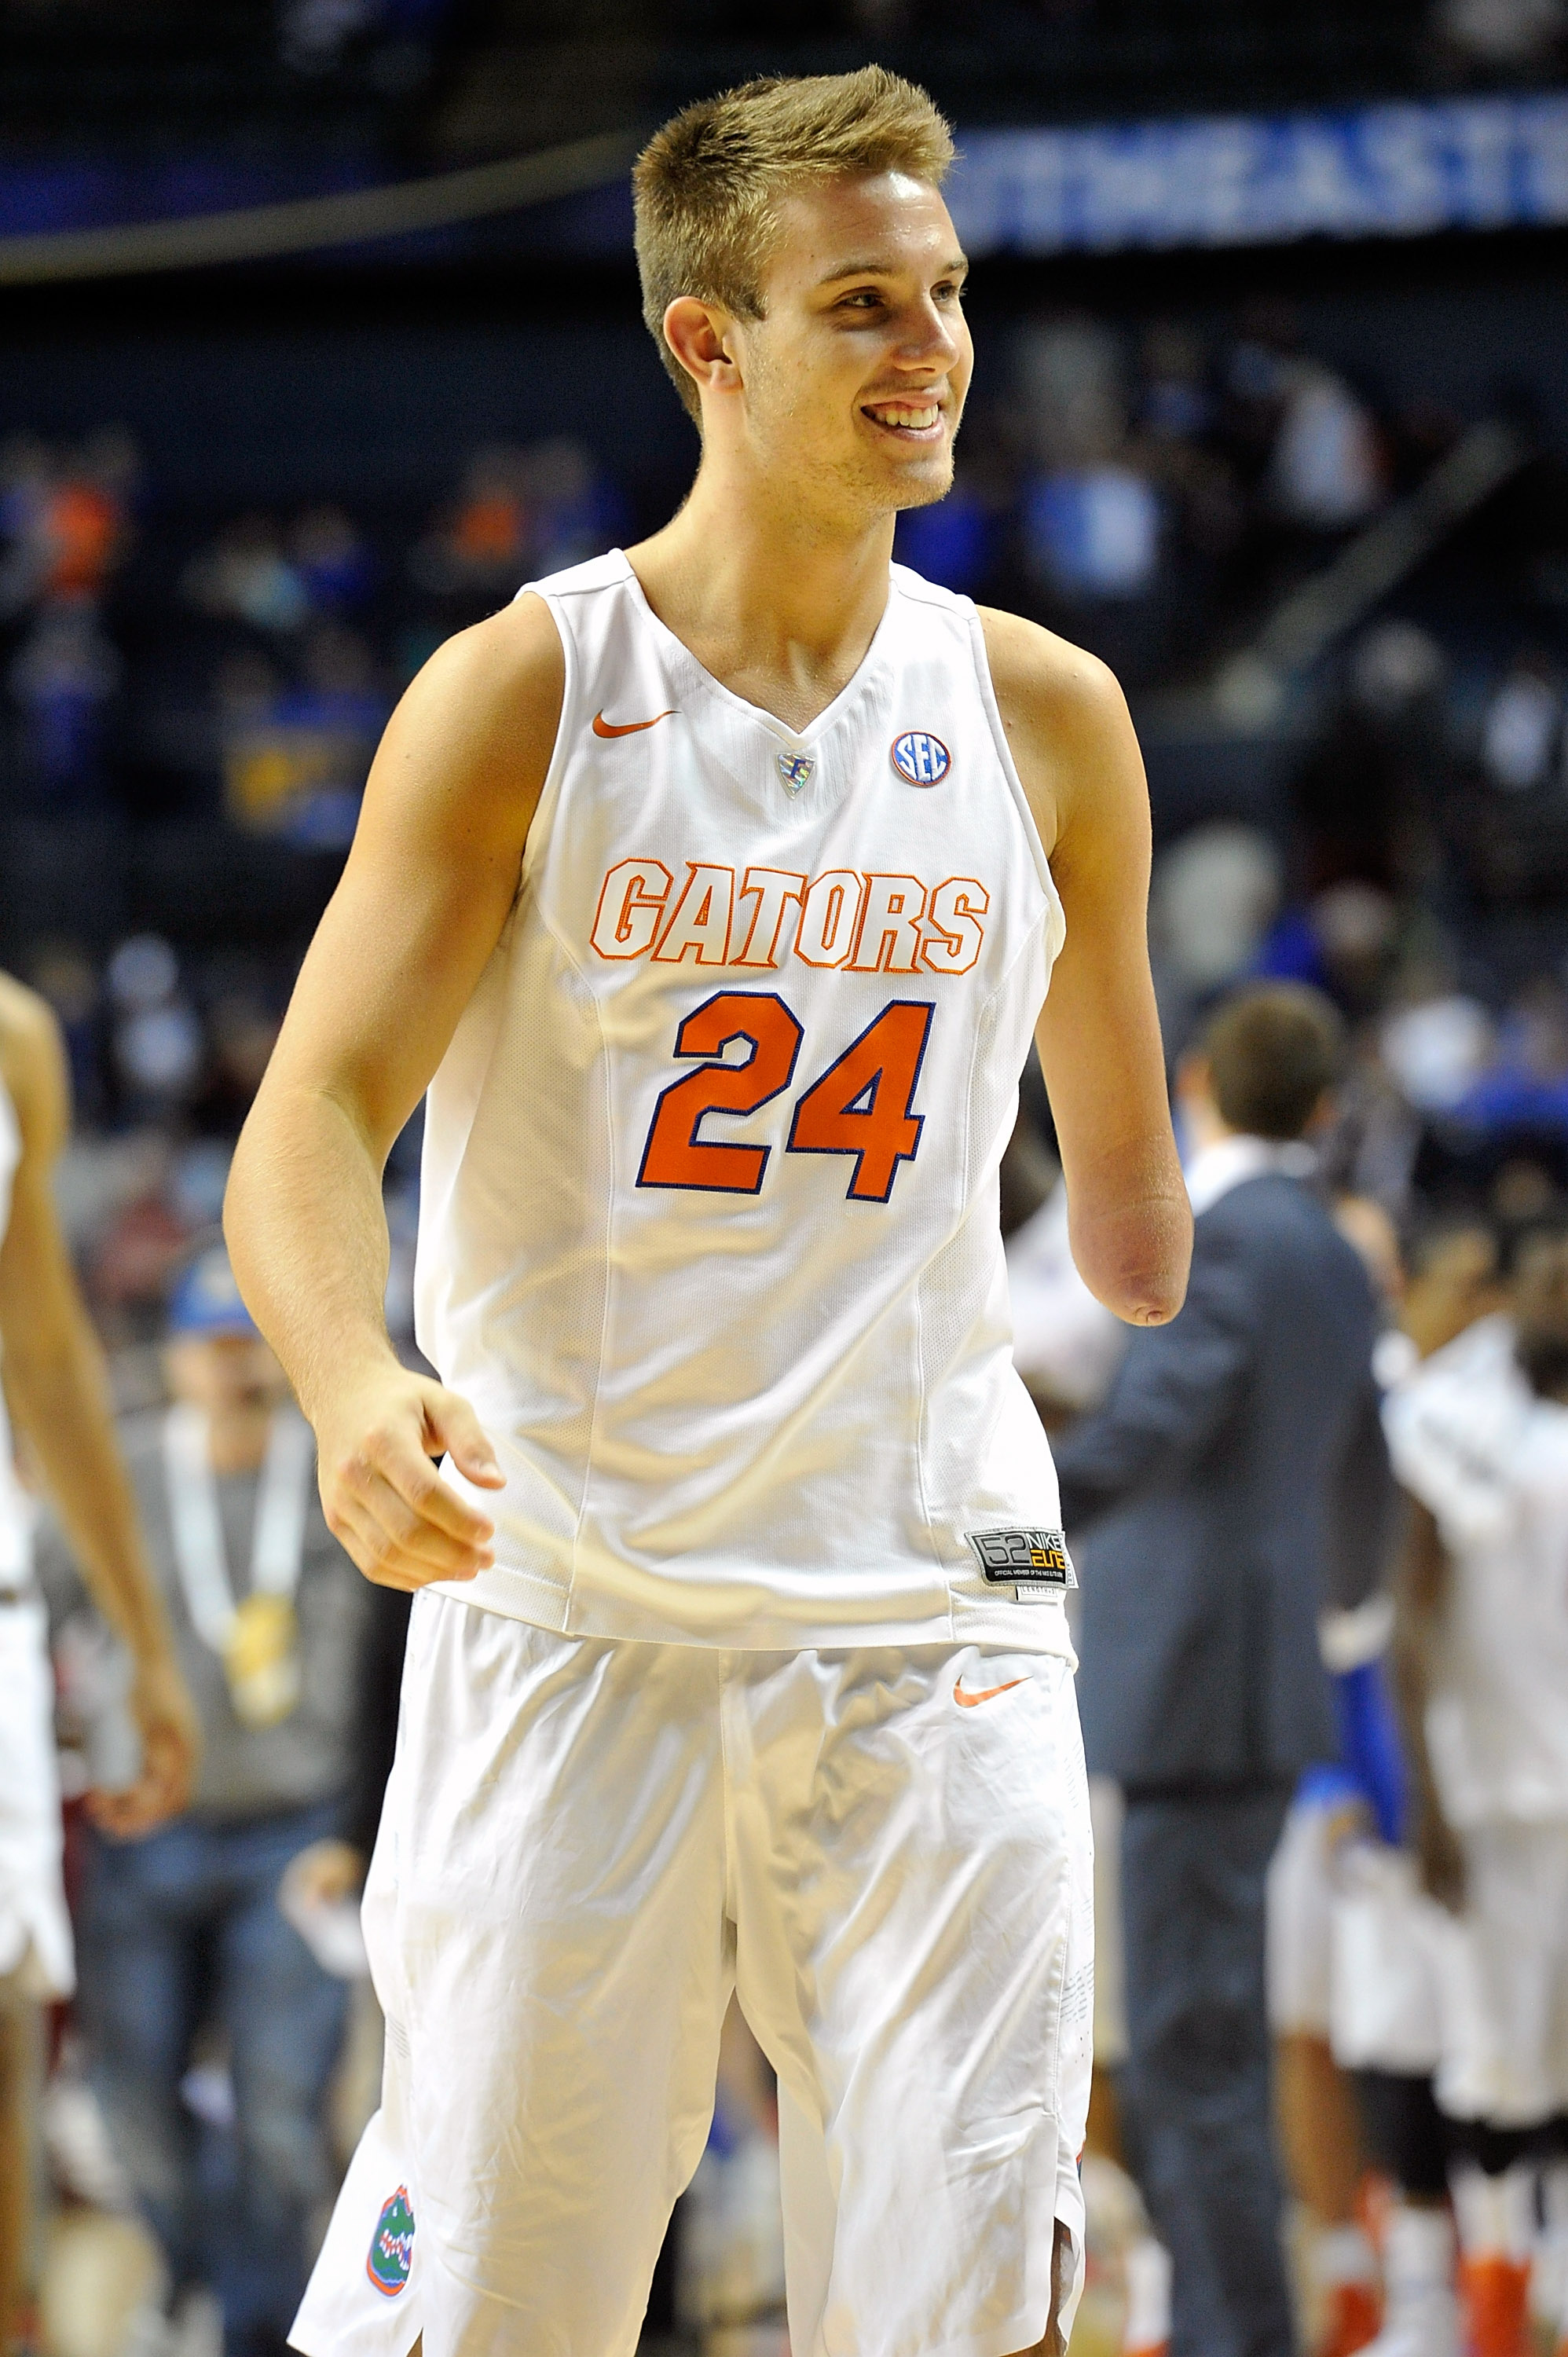 Zach Hodskins #24 of the Florida Gators smiles after defeating the Alabama Crimson Tide in a second round game of the SEC Basketball Tournament at Bridgestone Arena on March 12, 2015 in Nashville. (Frederick Breedon—Getty Images)